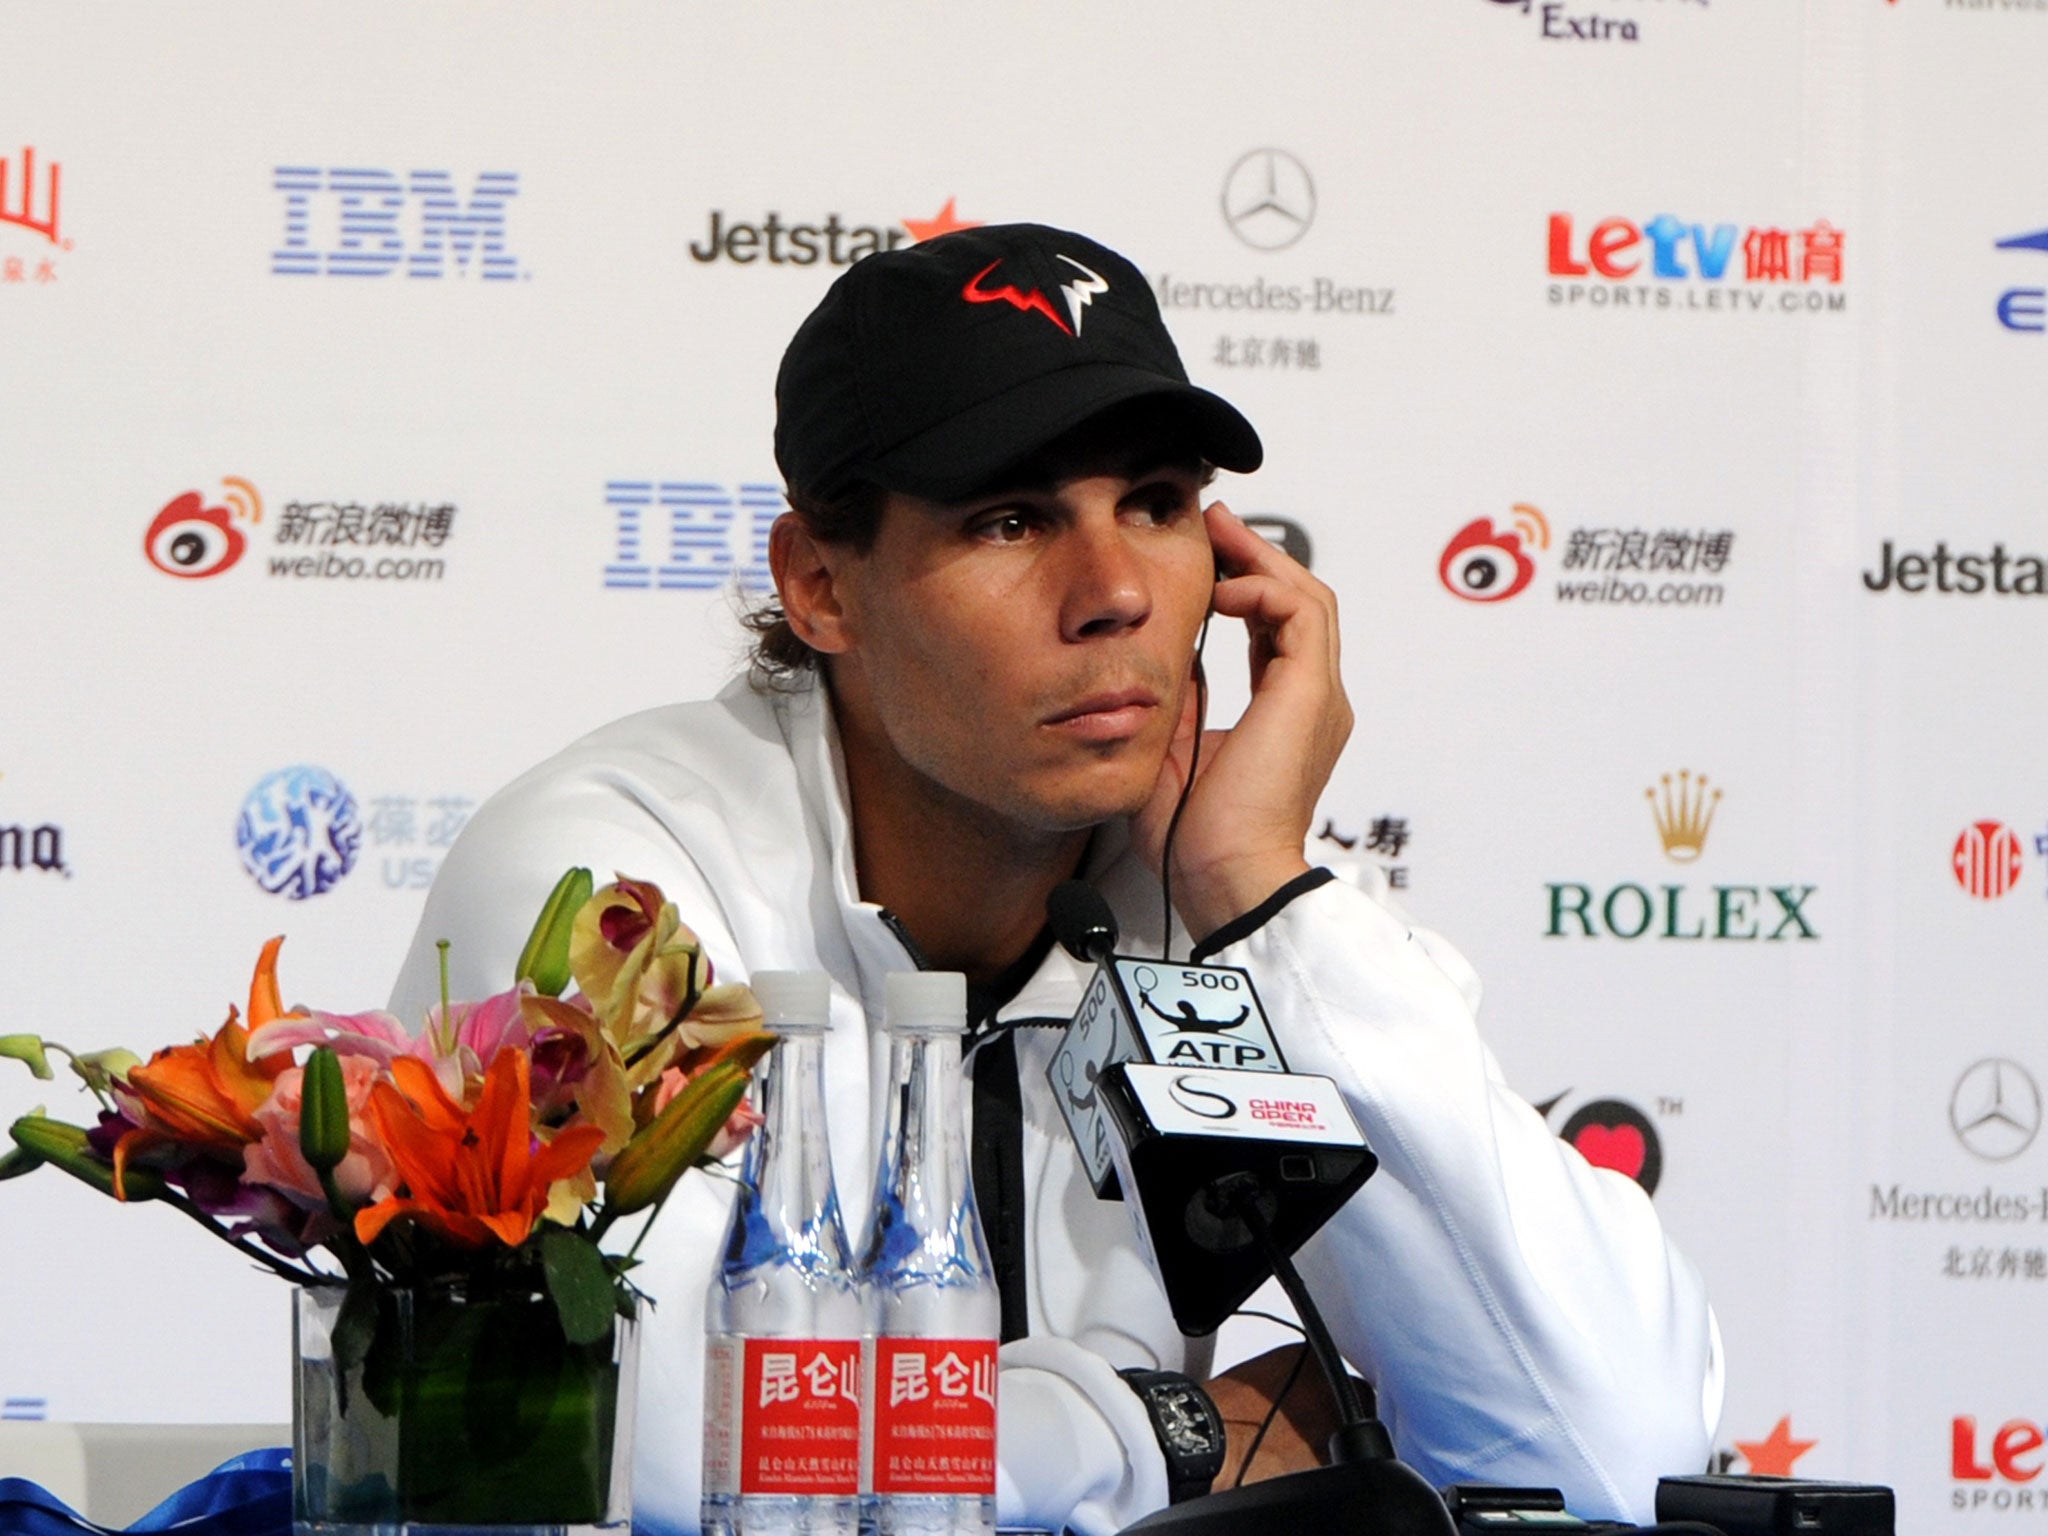 Rafael Nadal: The Spaniard will be the new world No 1 if he reaches the China Open final